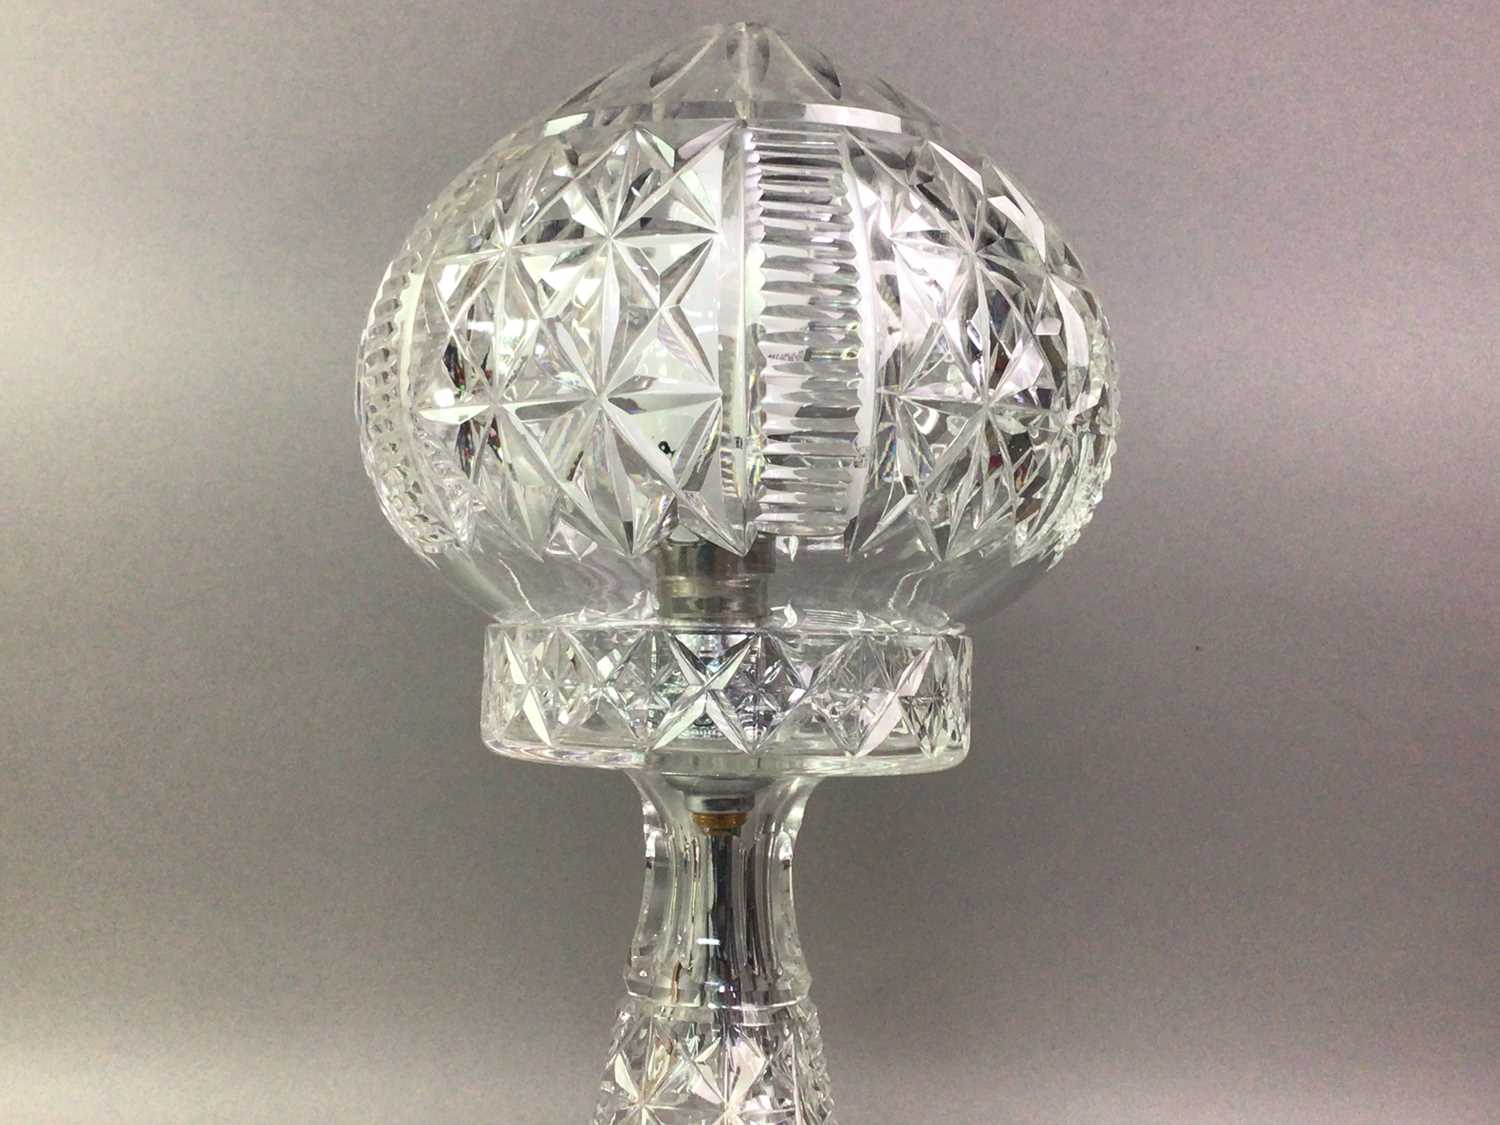 Lot 88 - COLLECTION OF FOUR CLEAR GLASS TABLE LAMPS